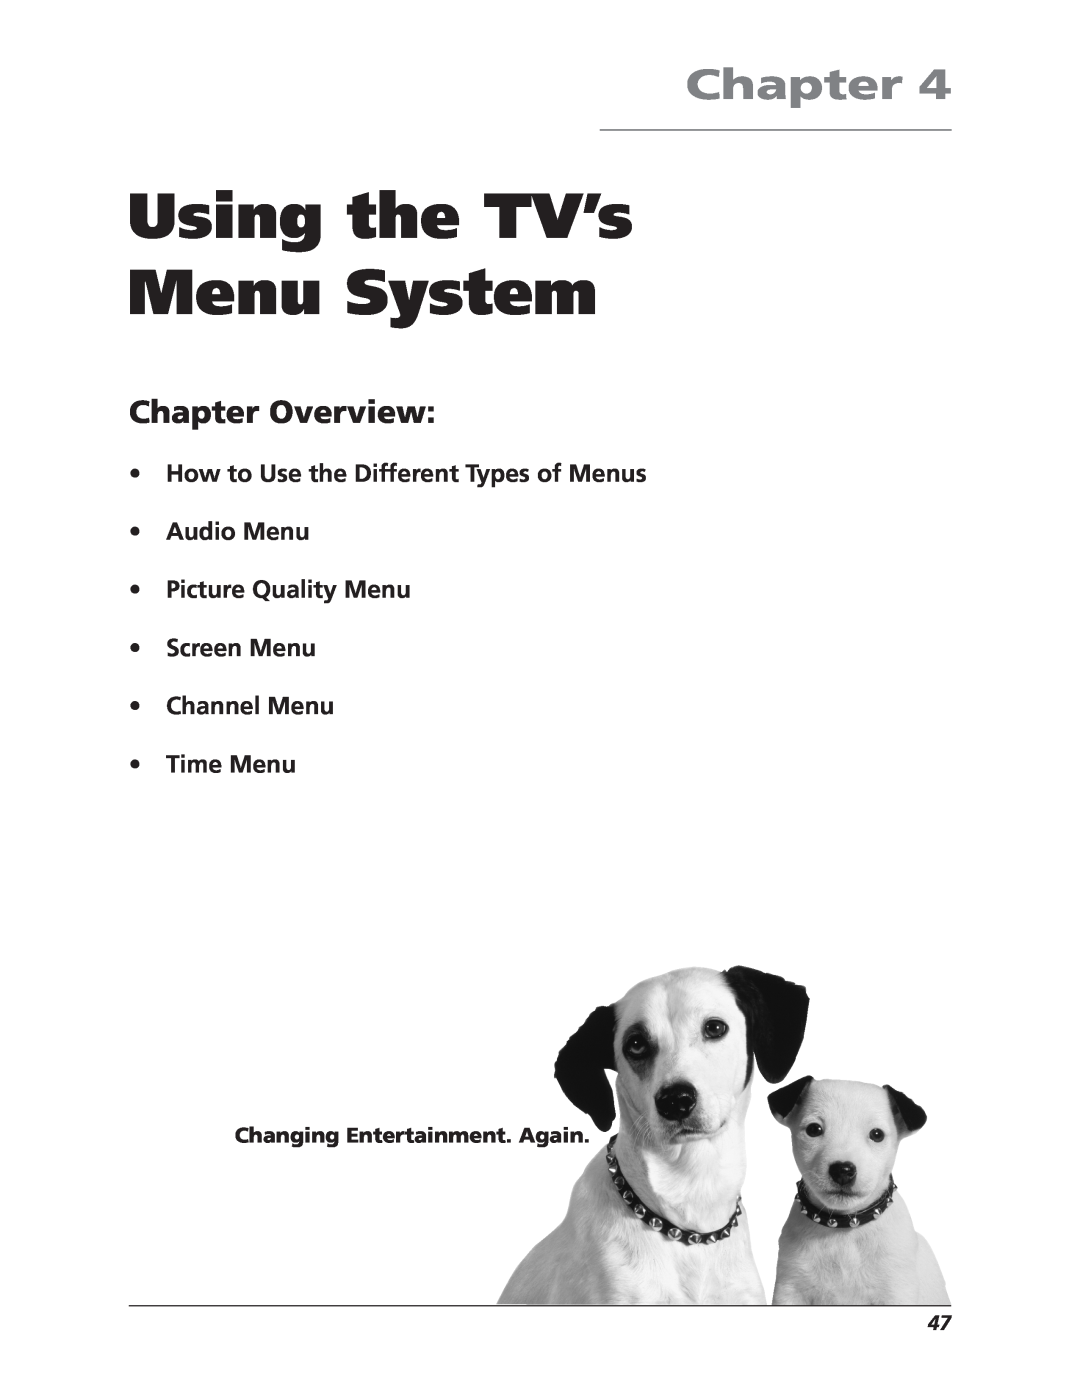 RCA F27669 manual Using the TV’s Menu System, How to Use the Different Types of Menus Audio Menu, Chapter Overview 